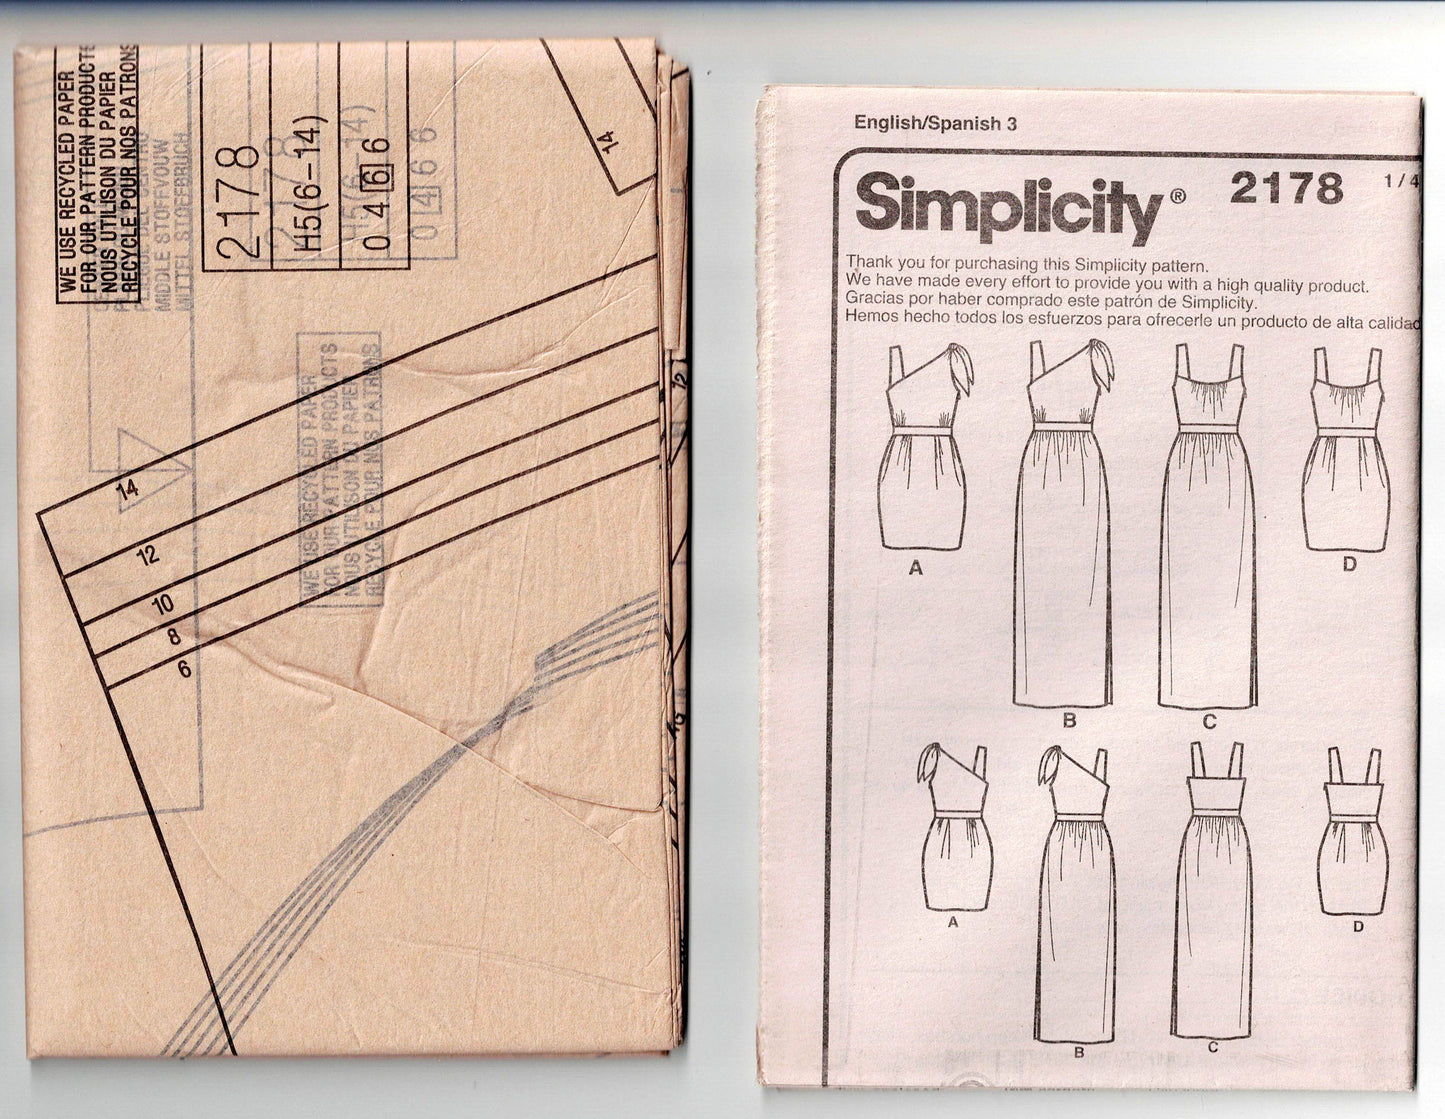 Simplicity 2178 CYNTHIA ROWLEY Womens One Shoulder Formal Prom Dress Out Of Print Sewing Pattern Size 6 - 14 UNCUT Factory Folded